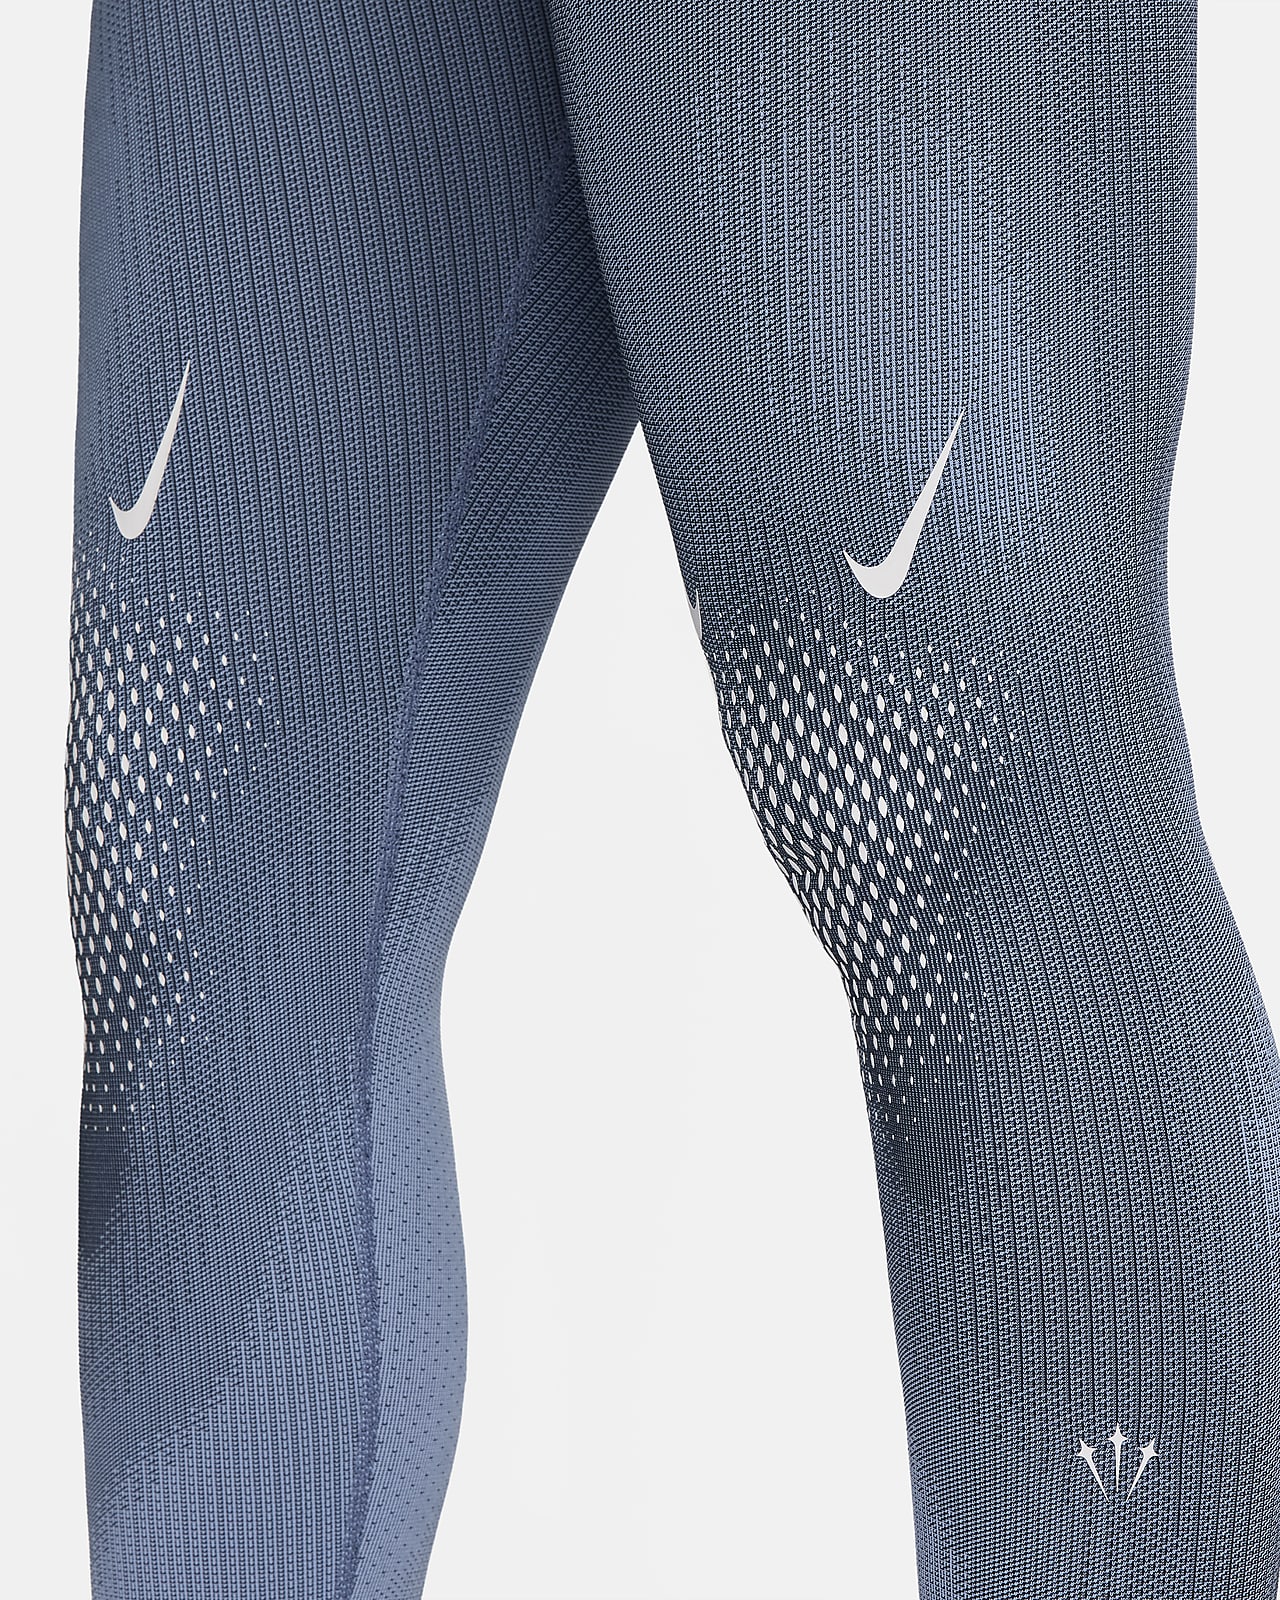 Nike NOCTA Single Leg Printed Tights Left, Where To Buy, DN0657-010